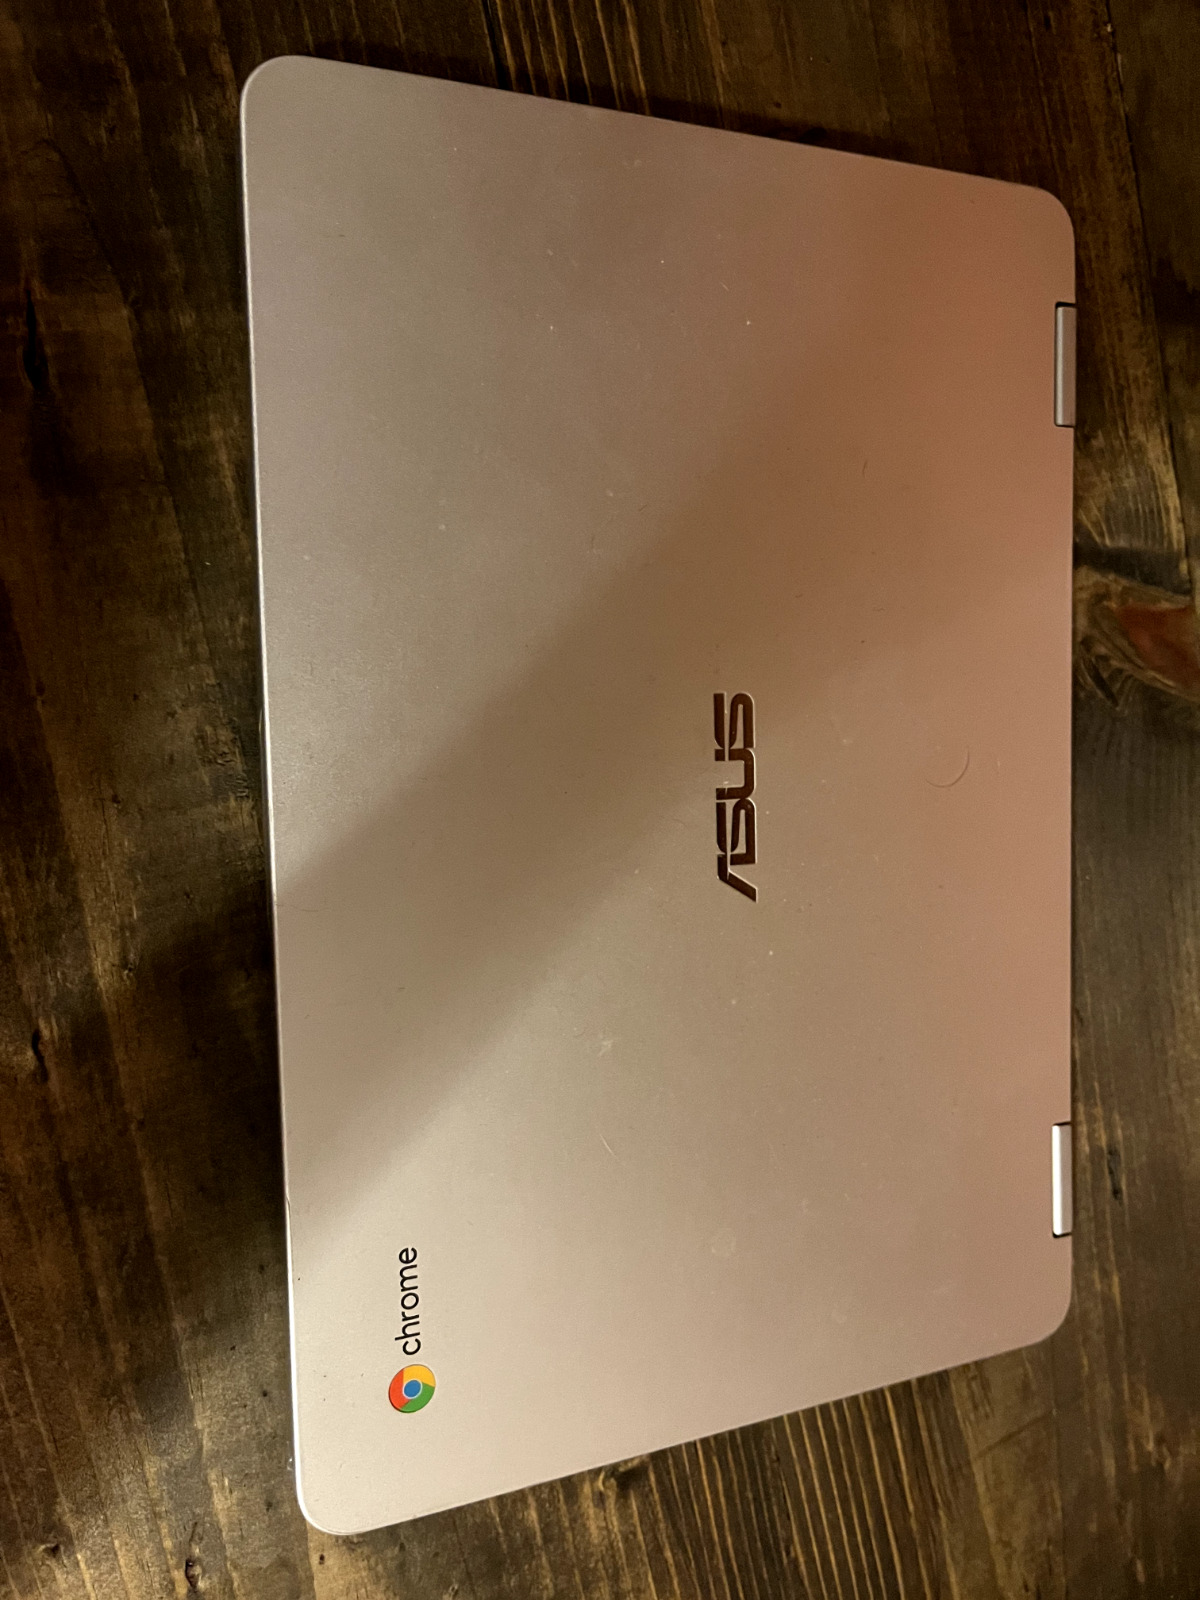 ASUS Chromebook C302C; Silver; For parts - display not working